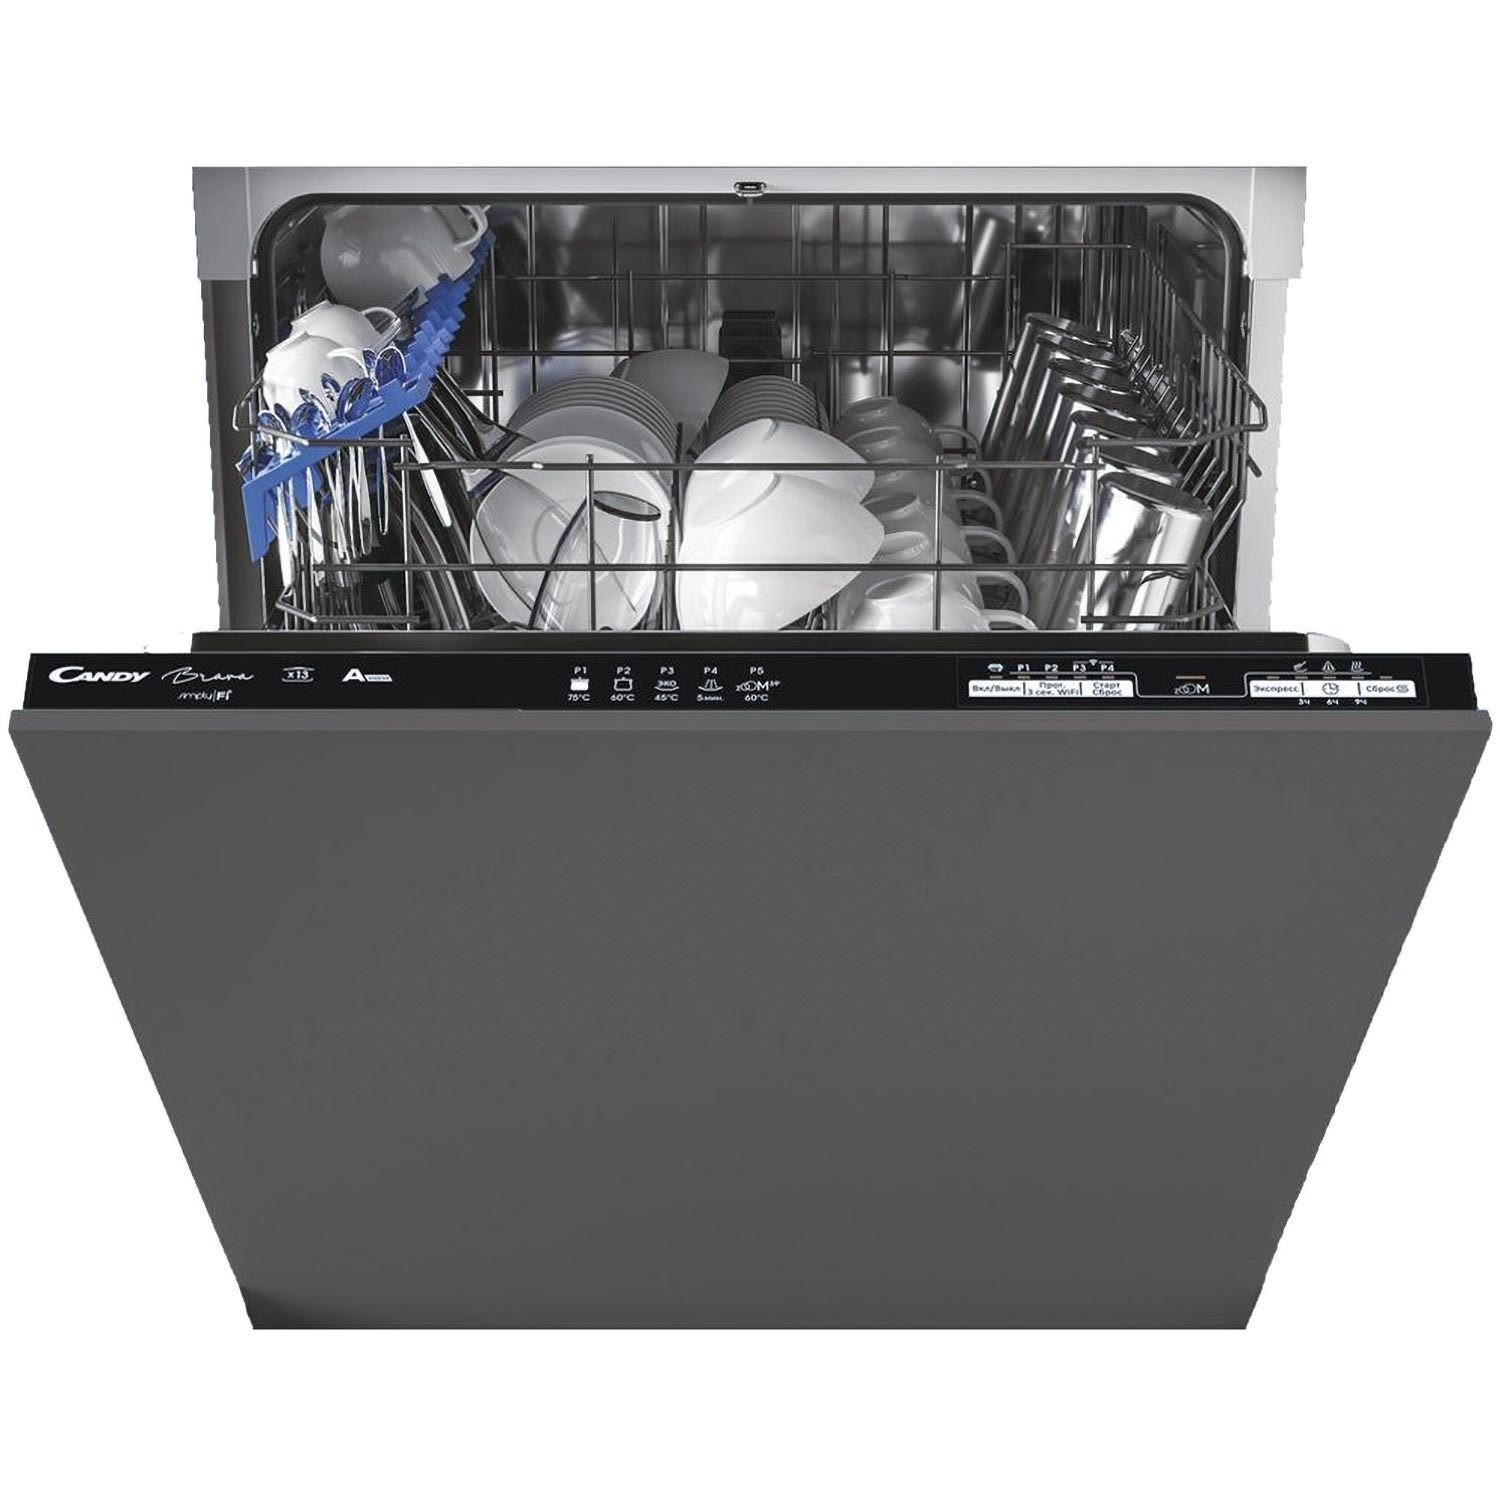 Candy Brava CDIN1L380PB Wifi Connected Fully Integrated Standard Dishwasher – Black Control Panel with Fixed Door Fixing Kit – F Rated